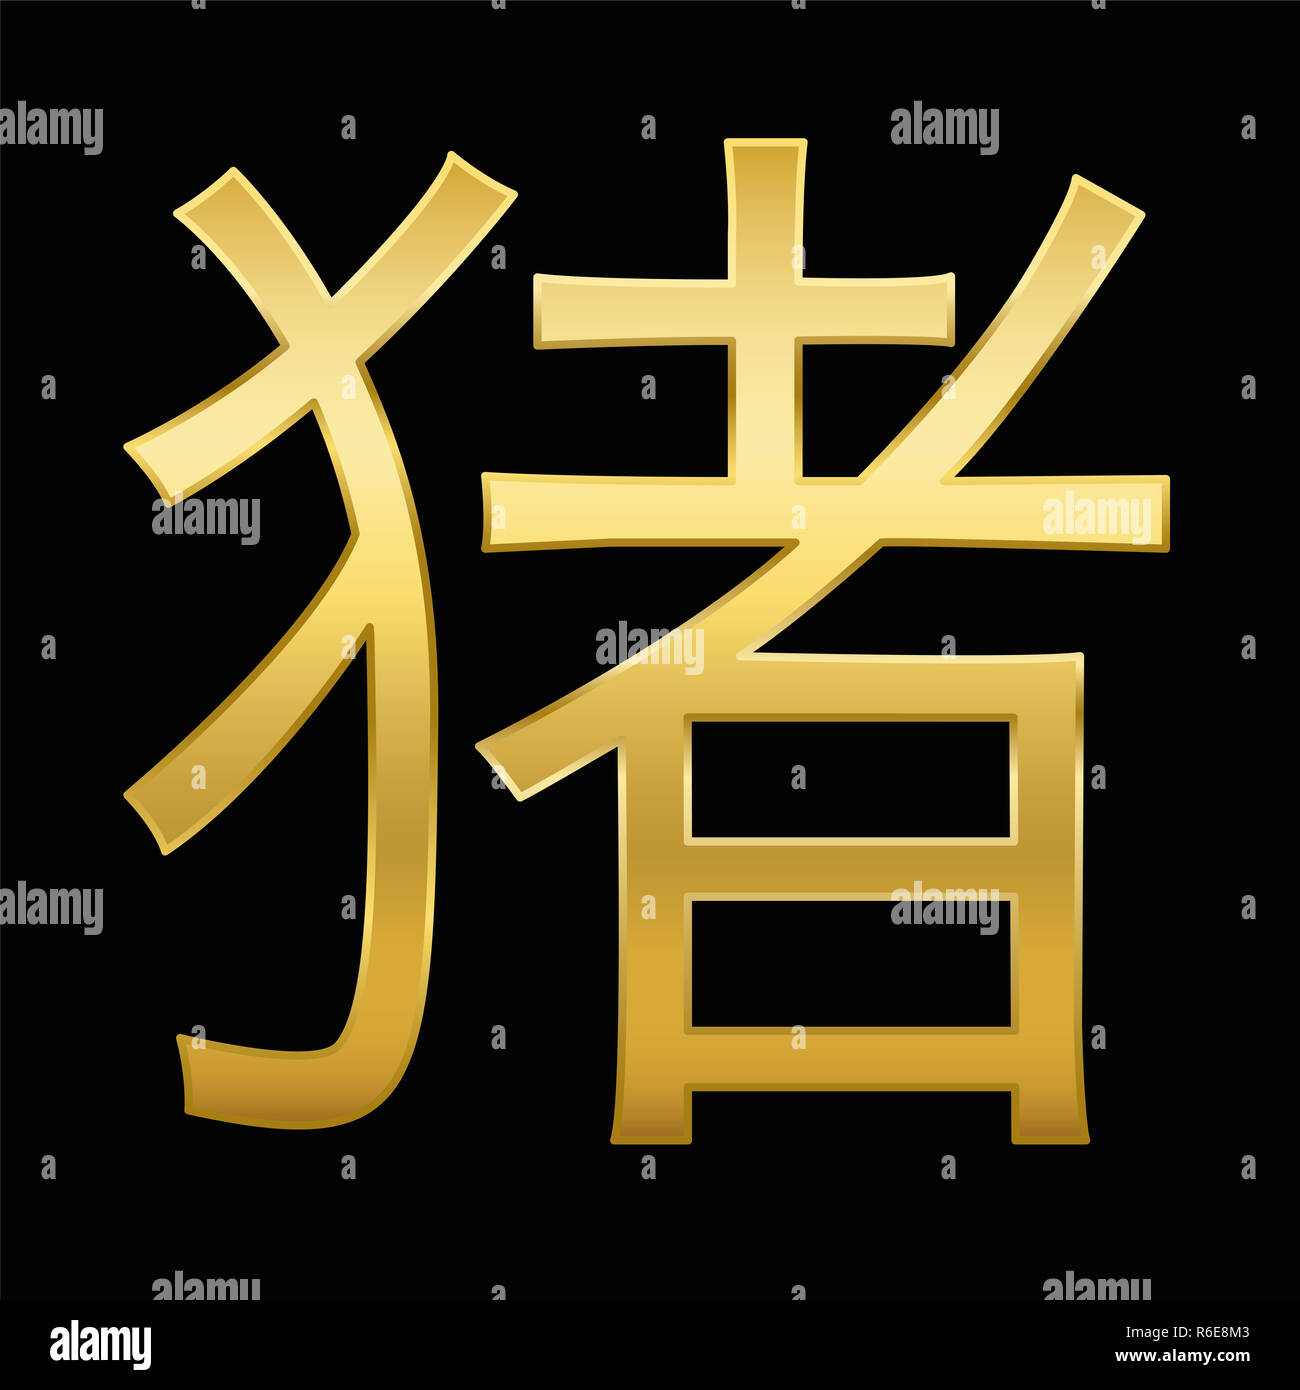 Chinese character meaning pig. Year of the pig. Golden symbol on black background. Stock Photo